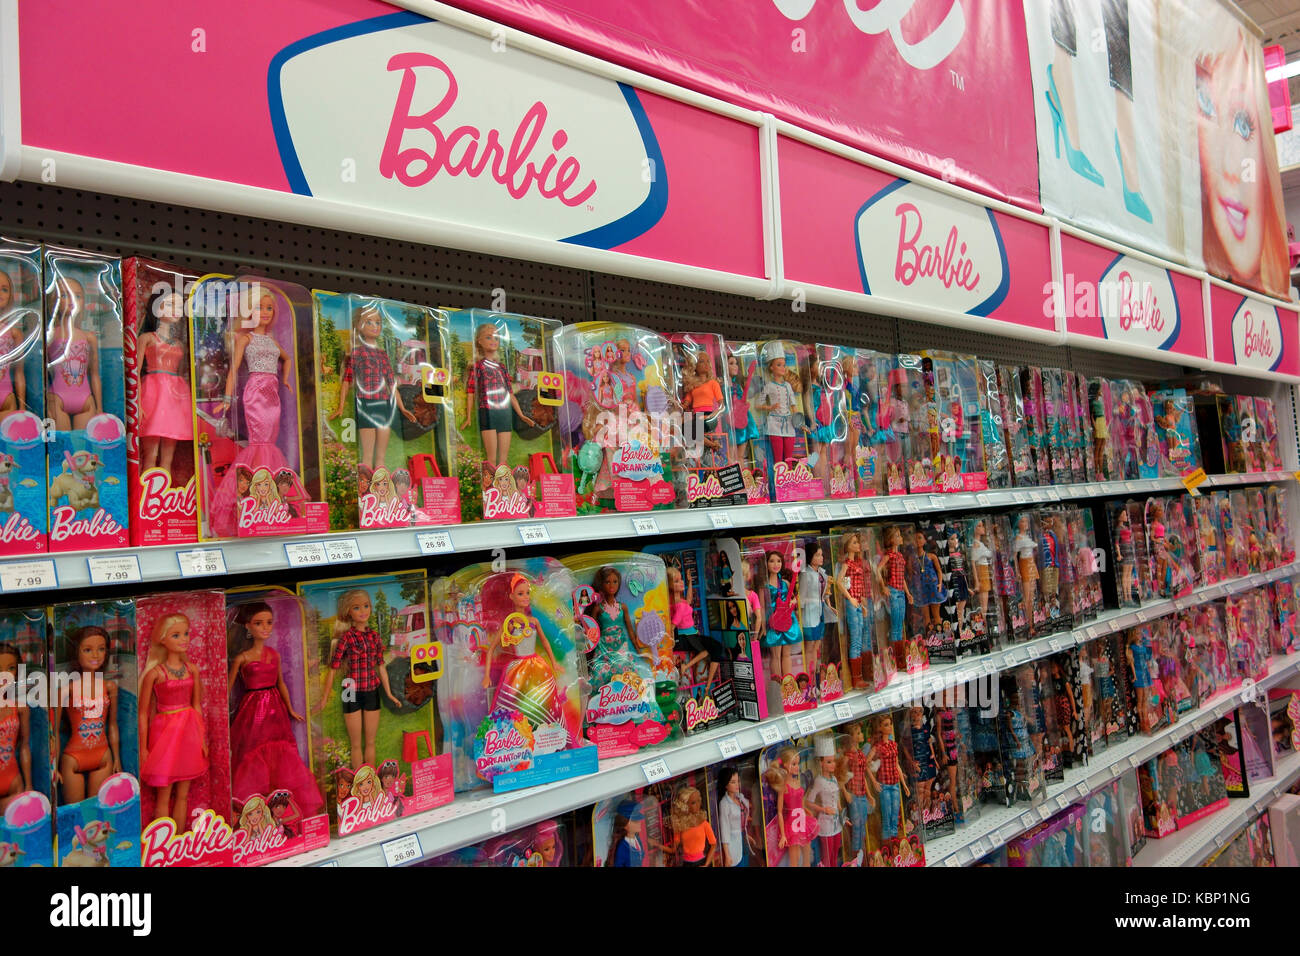 Barbie Dolls Store High Resolution Stock Photography and Images - Alamy